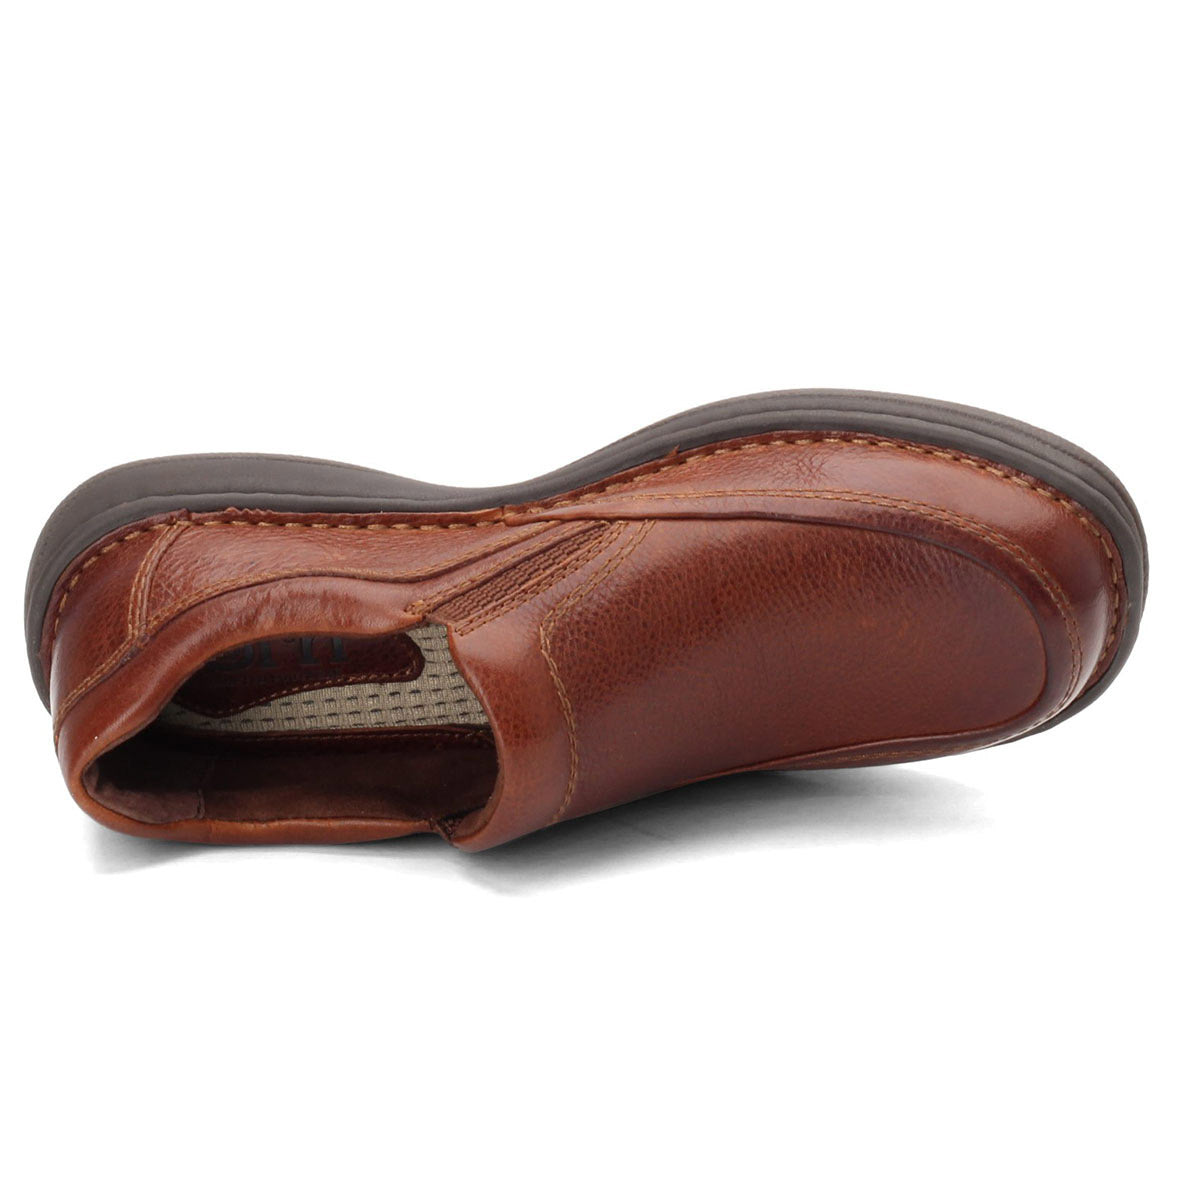 Born Blast III Slip On Dark Tan loafer shoe featuring Opanka hand-crafted construction, on a white background.